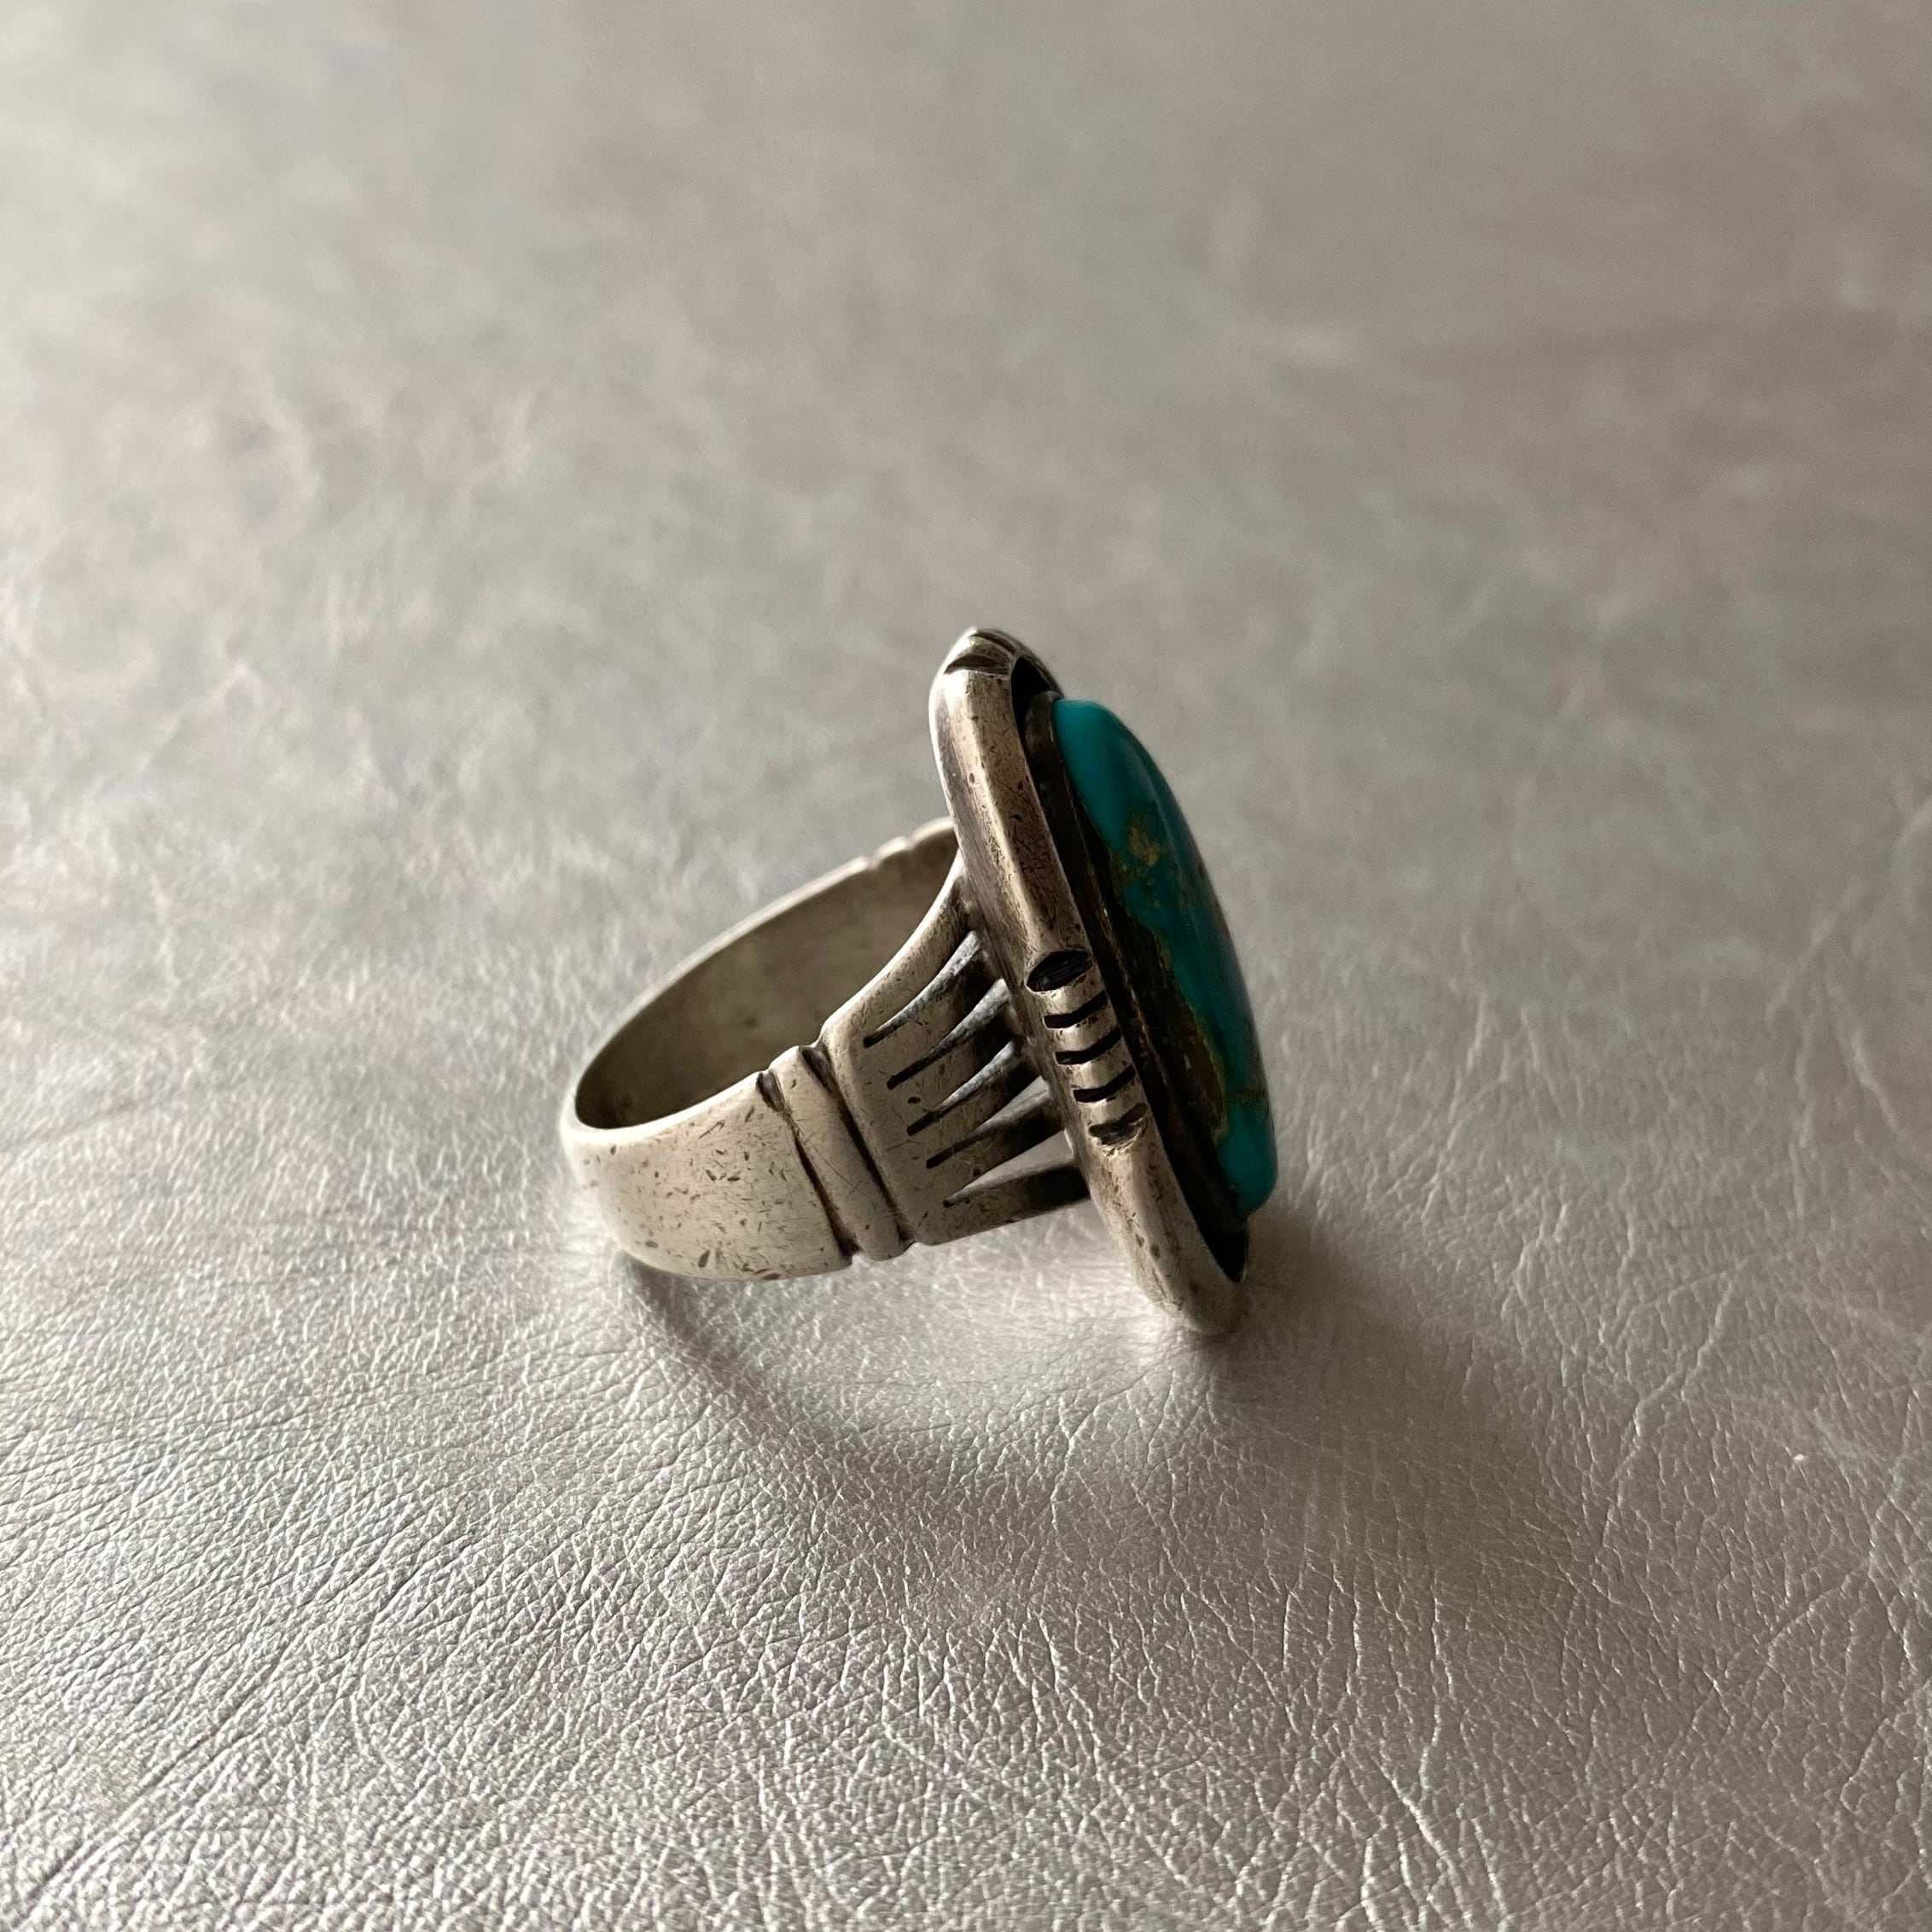 Vintage USA sterling turquoise ring ヴィンテージ ネイティブアメリカン フィリップ・サンチェス  シルバー925 天然石 ターコイズ リング POOL VINTAGE